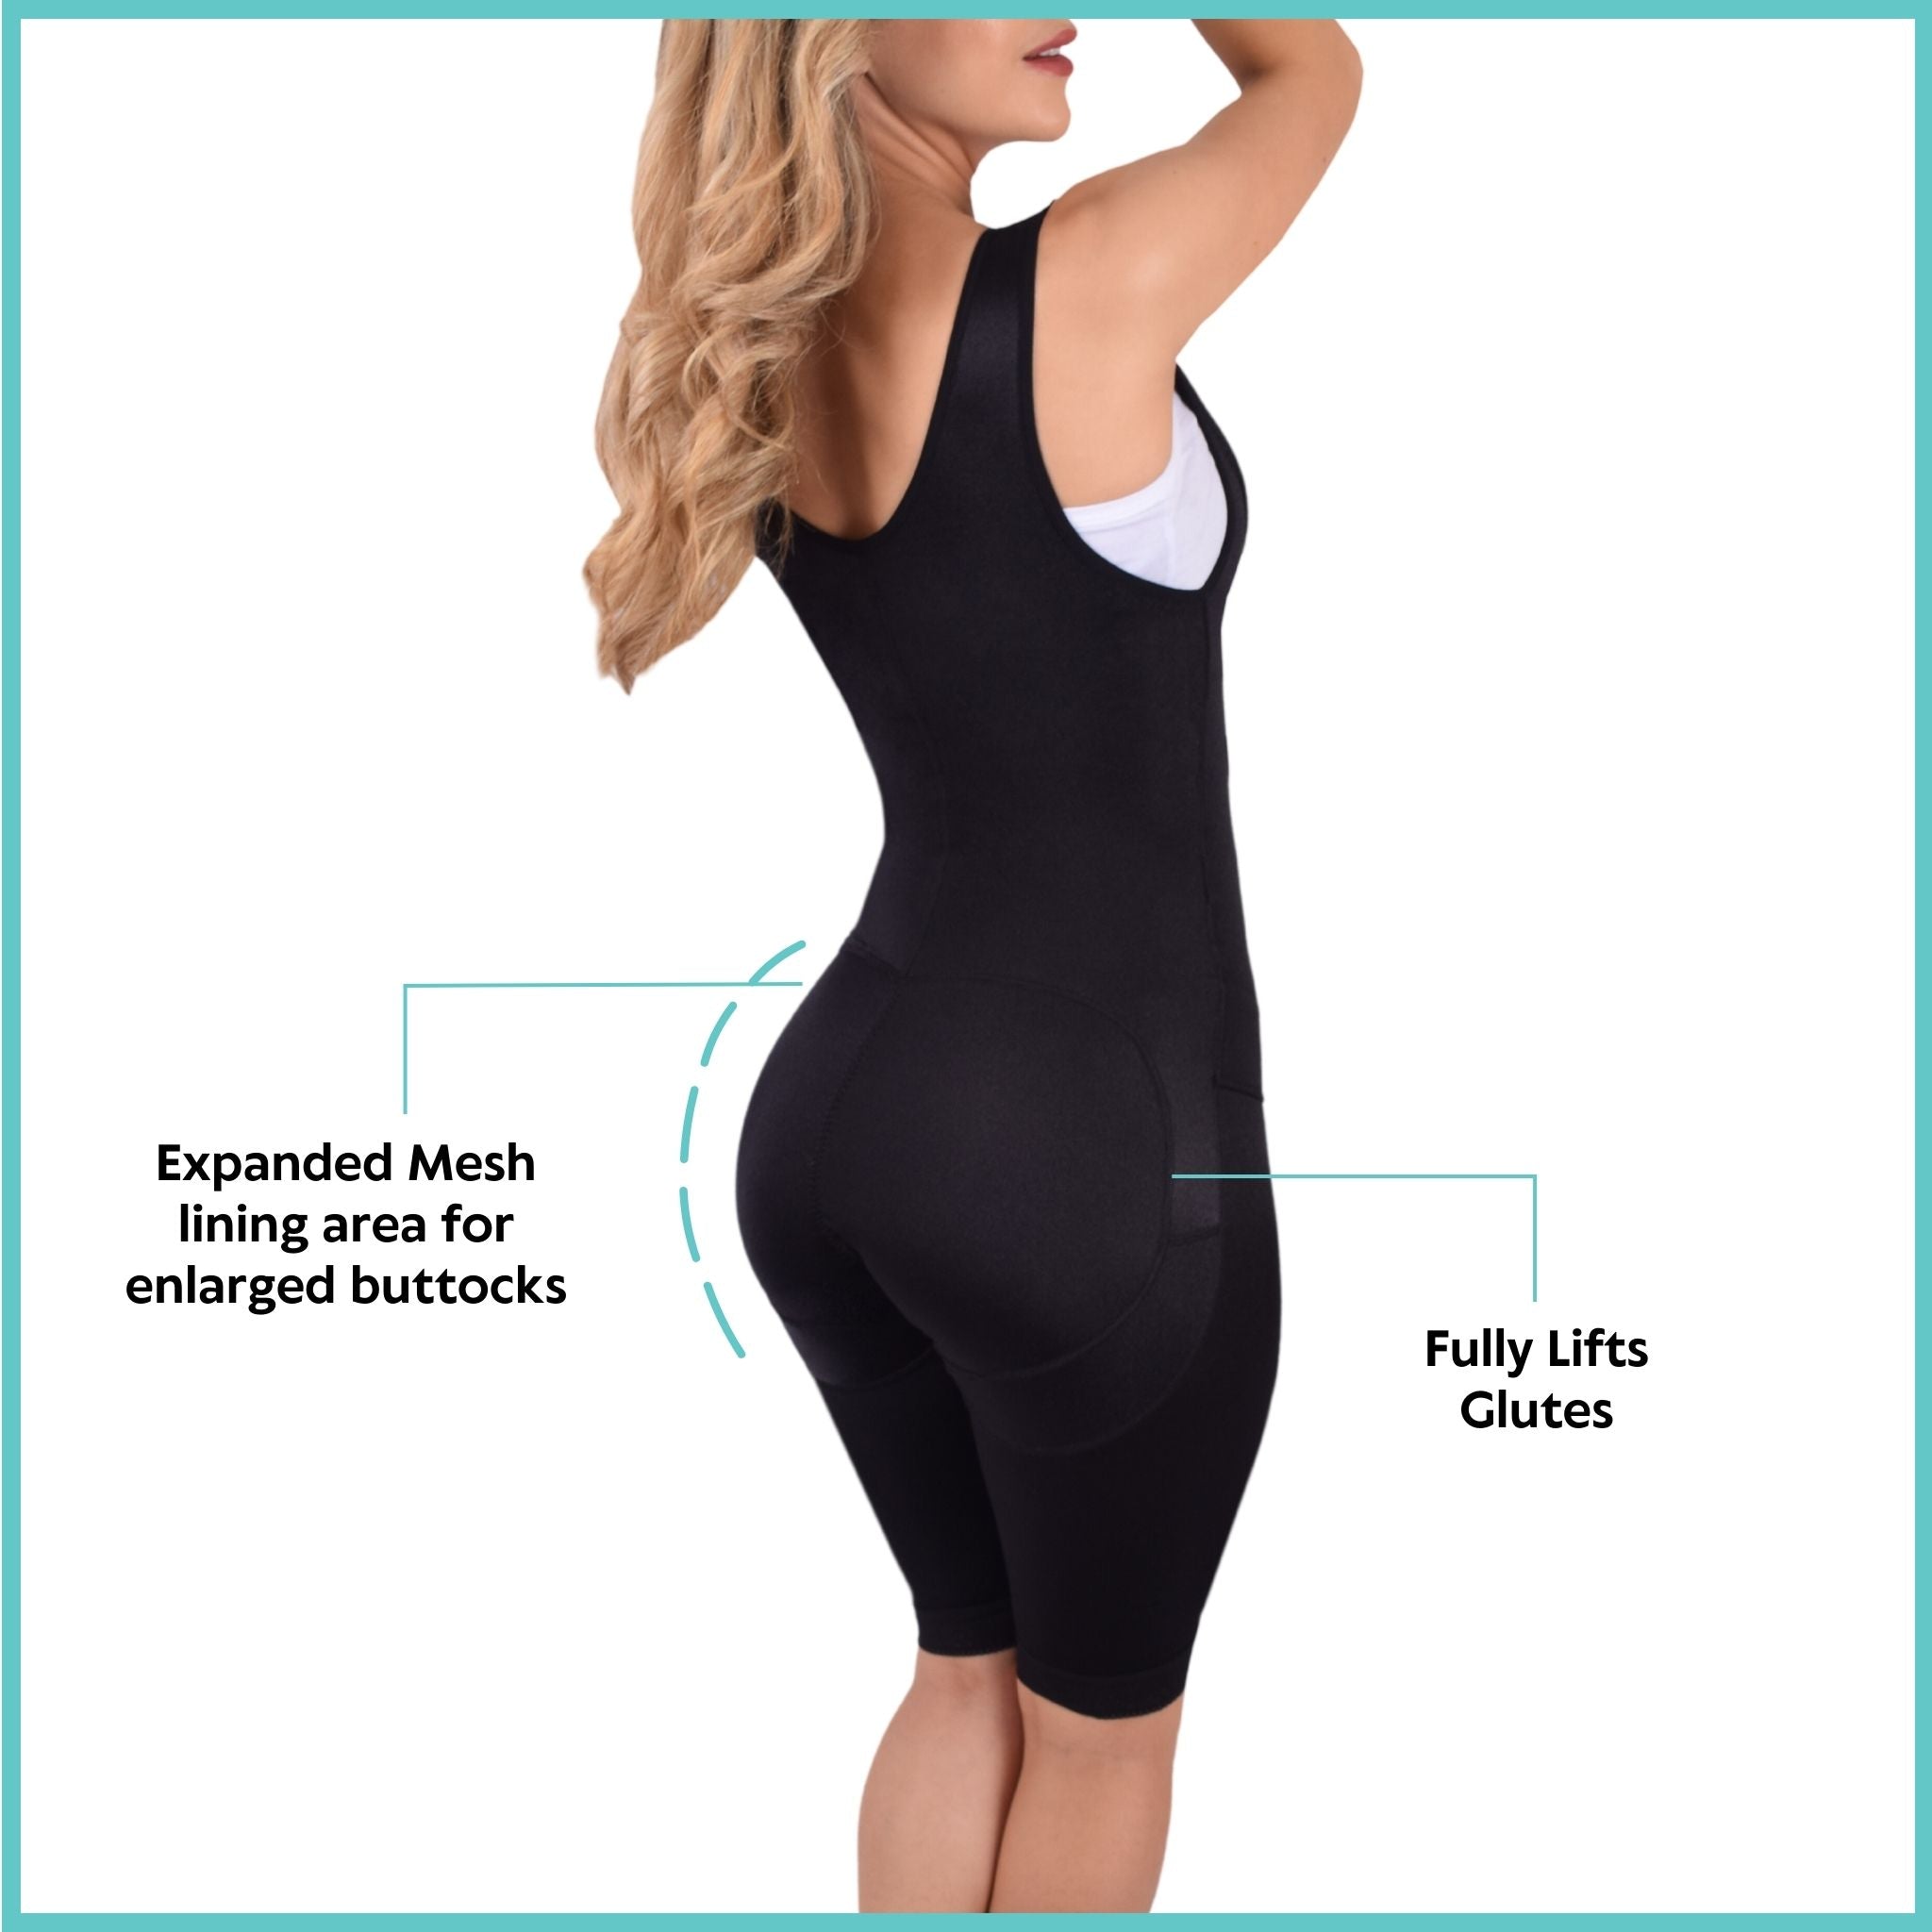 Medico offers Surgical Garments and Aids for after Abdominoplasty